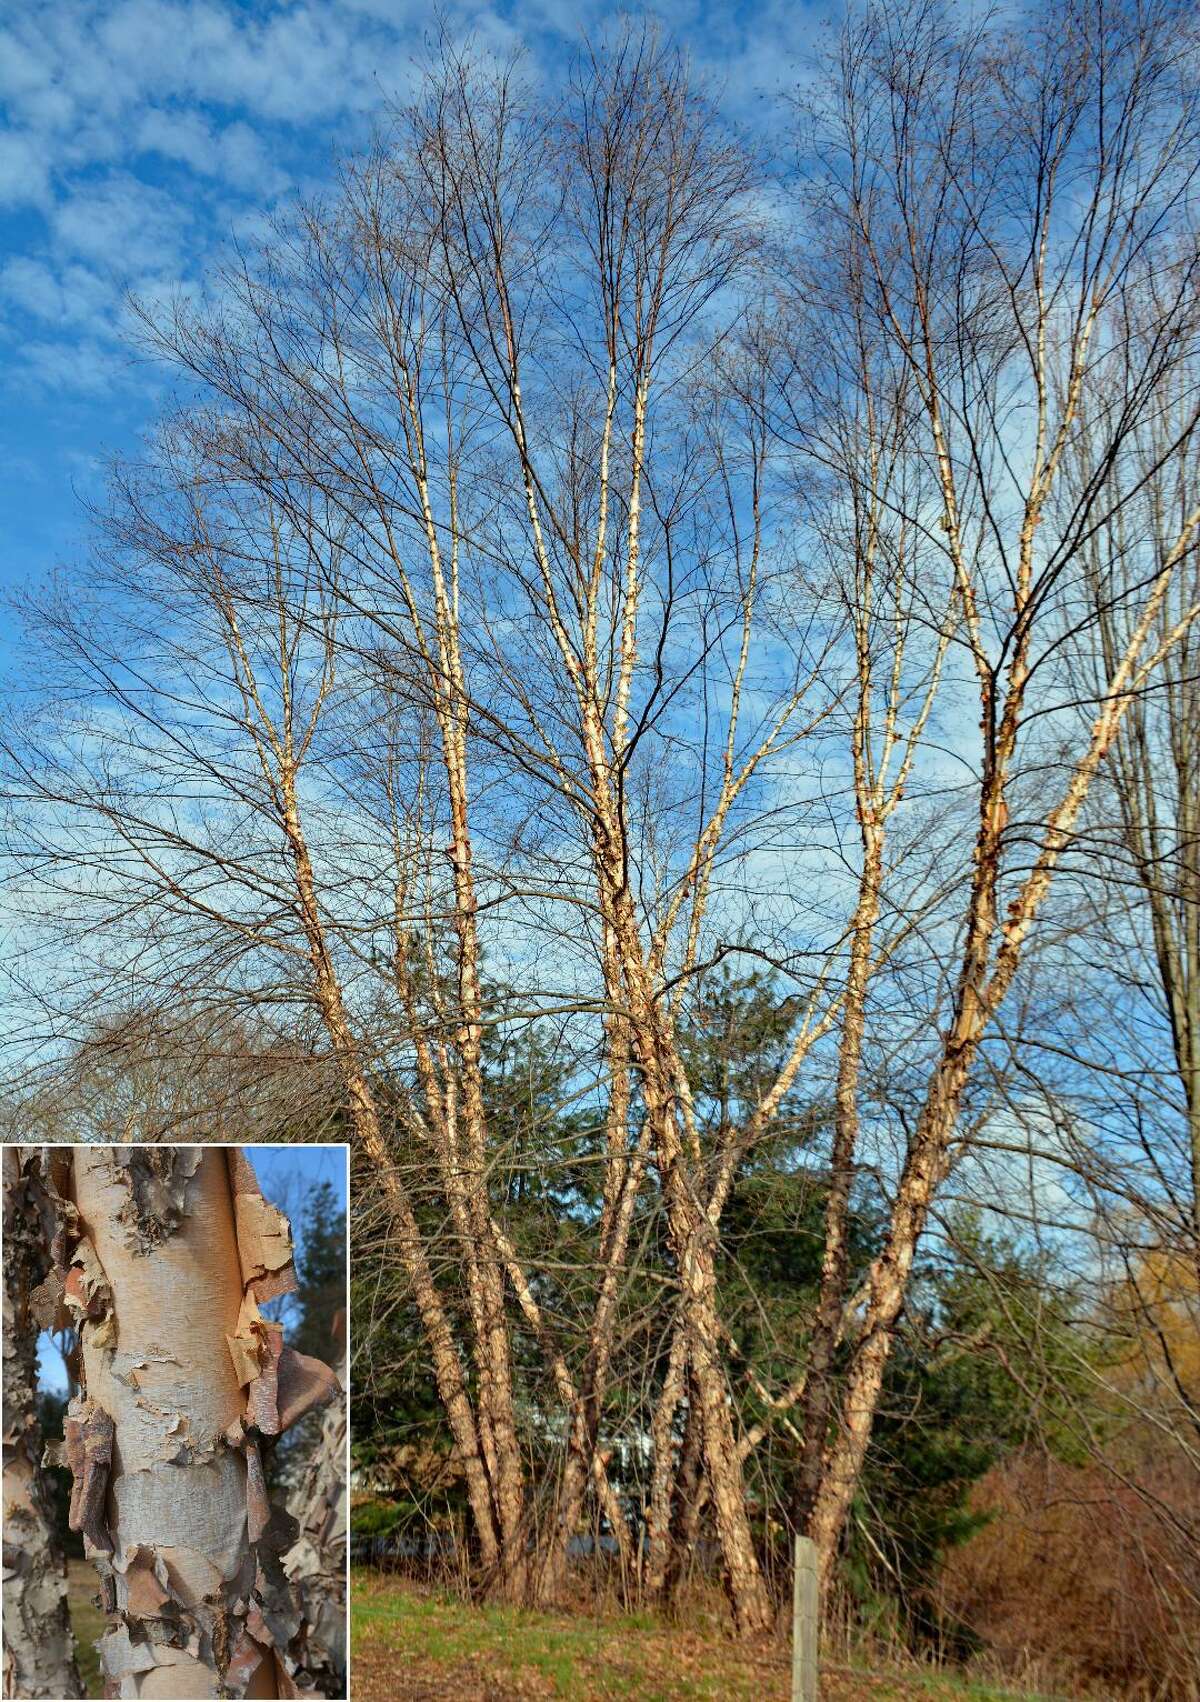 The Hamden Tree Commission has named these Heritage river birch trees (Betula nigra var ‘Cully’) as the Hamden Notable Trees for the month of January, 2020. The beautiful salmon-cinnamon colored bark of the Heritage river birch exfoliates in large sheets and provides stunning visual interest in winter months.